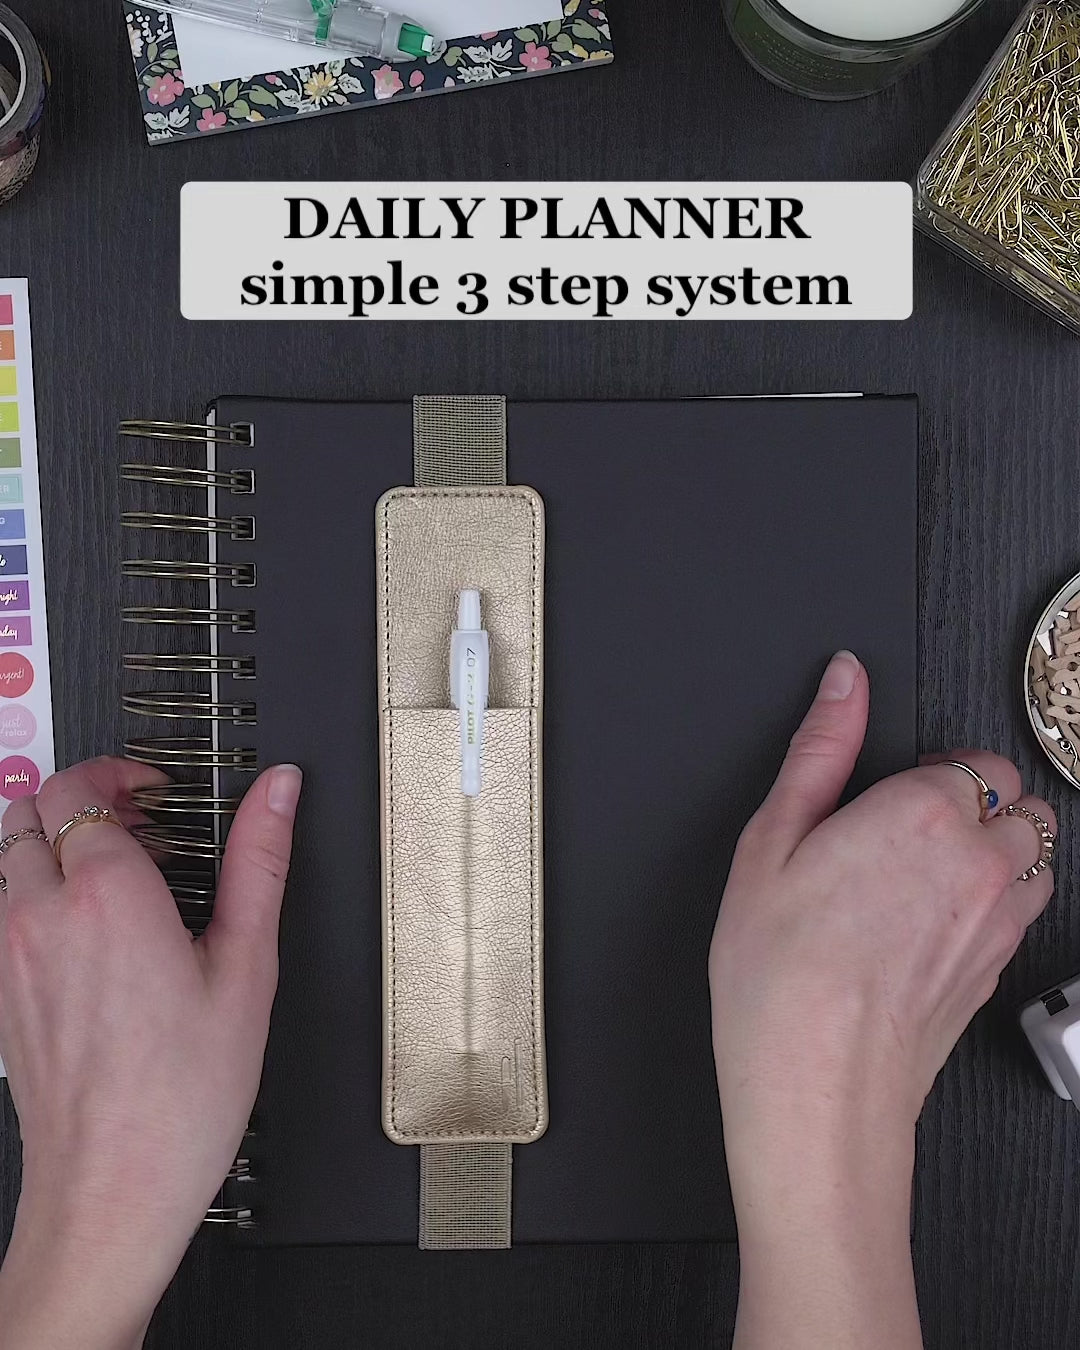 Daily Planner - Bennet